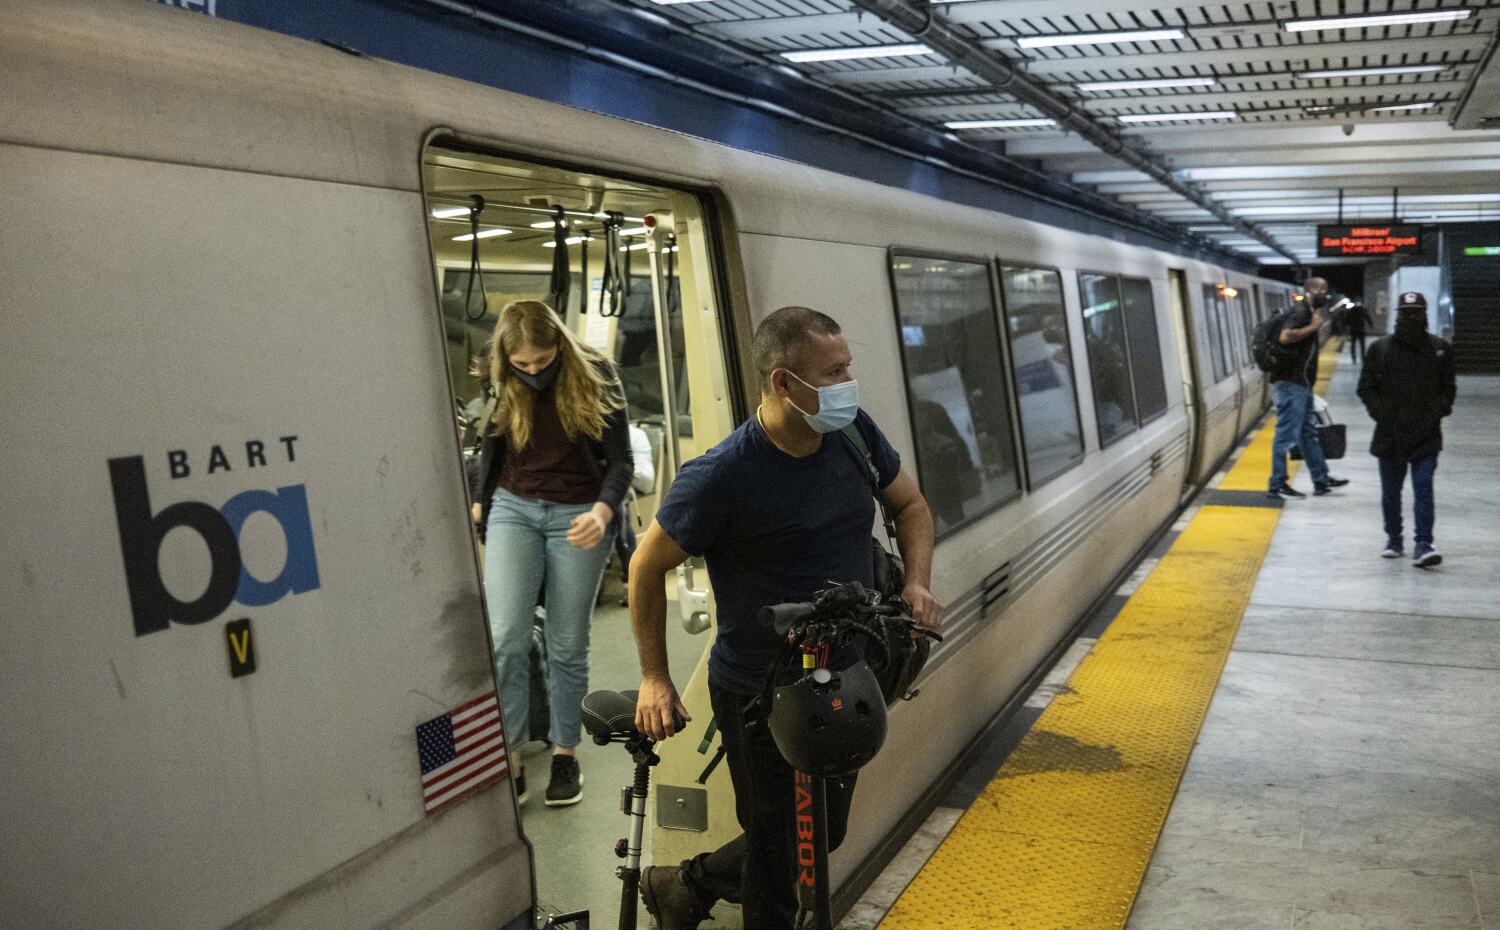 Man rides BART for seven hours. He ends up dead at the end of the line